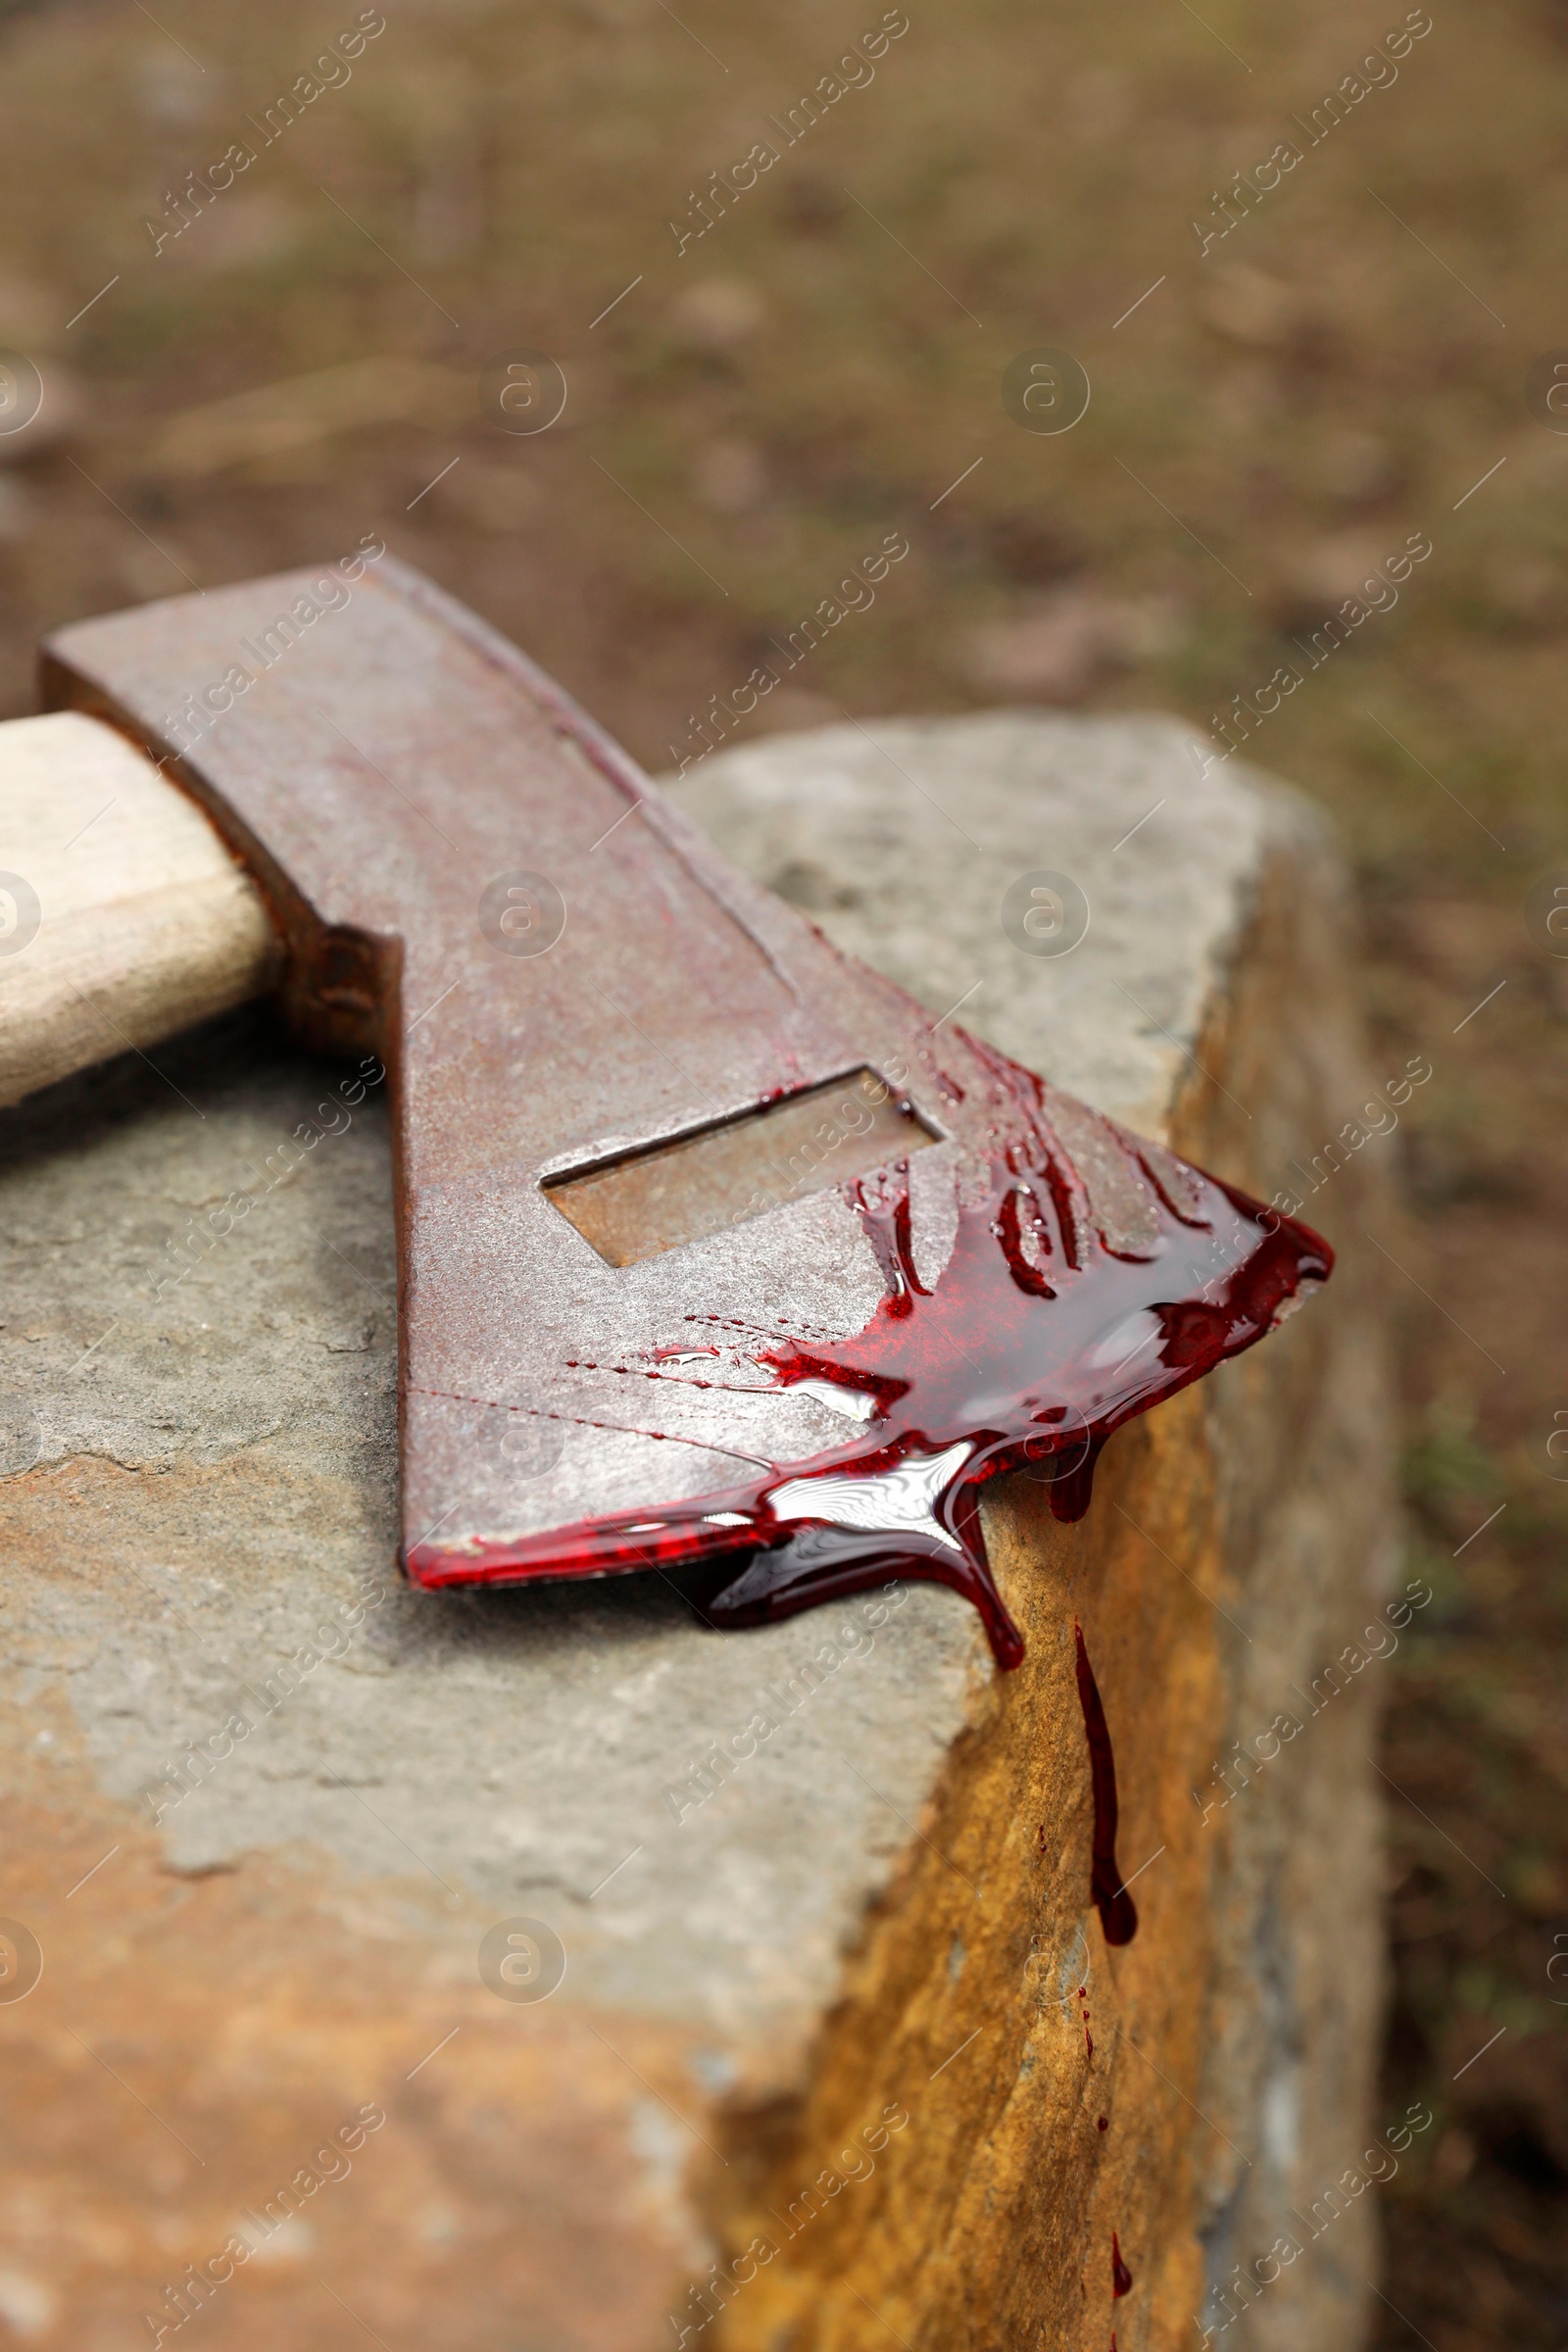 Photo of Axe with blood on stone outdoors, closeup